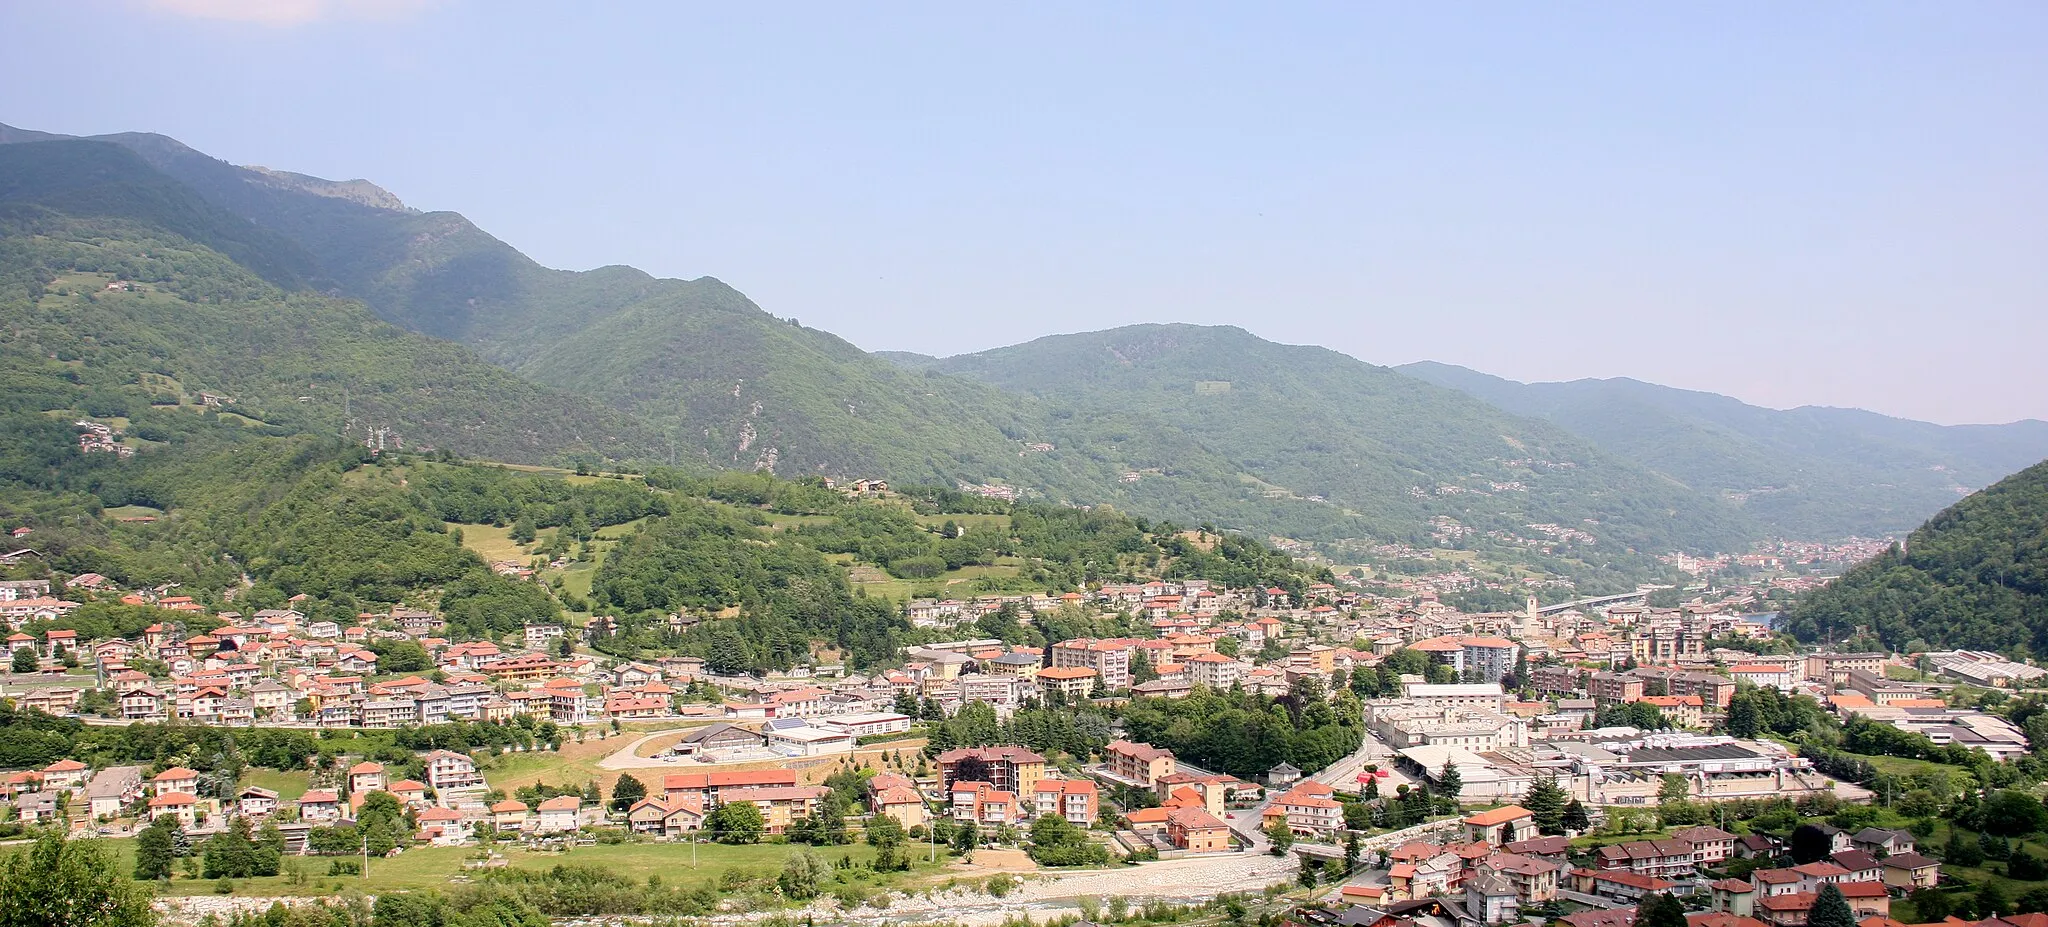 Photo showing: City of Perosa Argentina, Chisone Valley, province of Turin, Piemonte, Italy